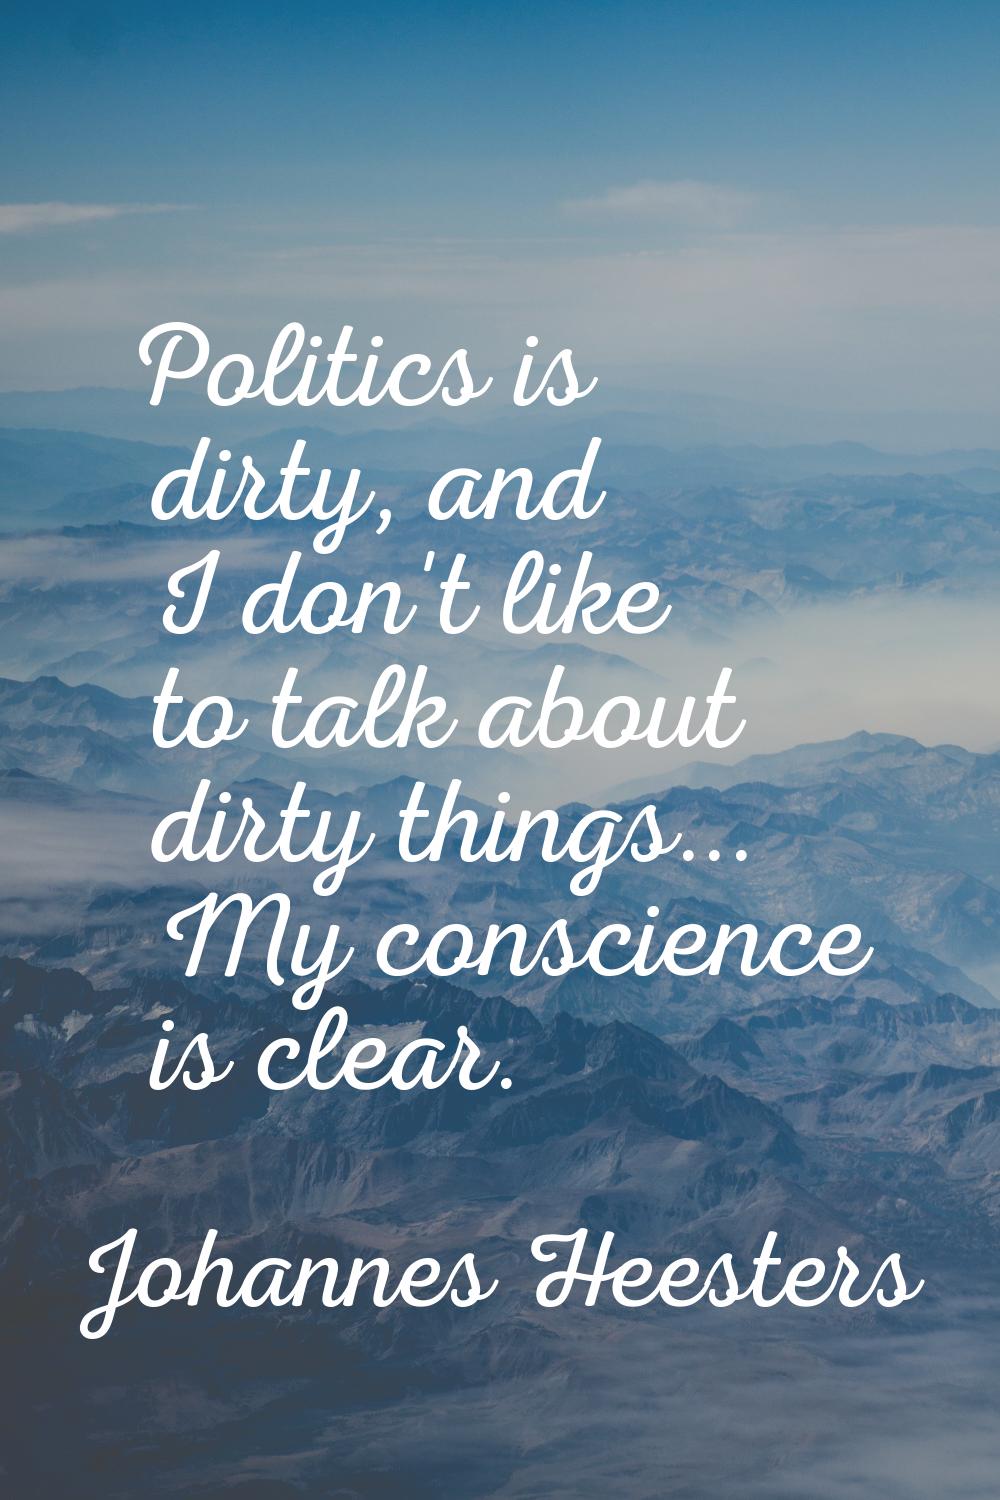 Politics is dirty, and I don't like to talk about dirty things... My conscience is clear.